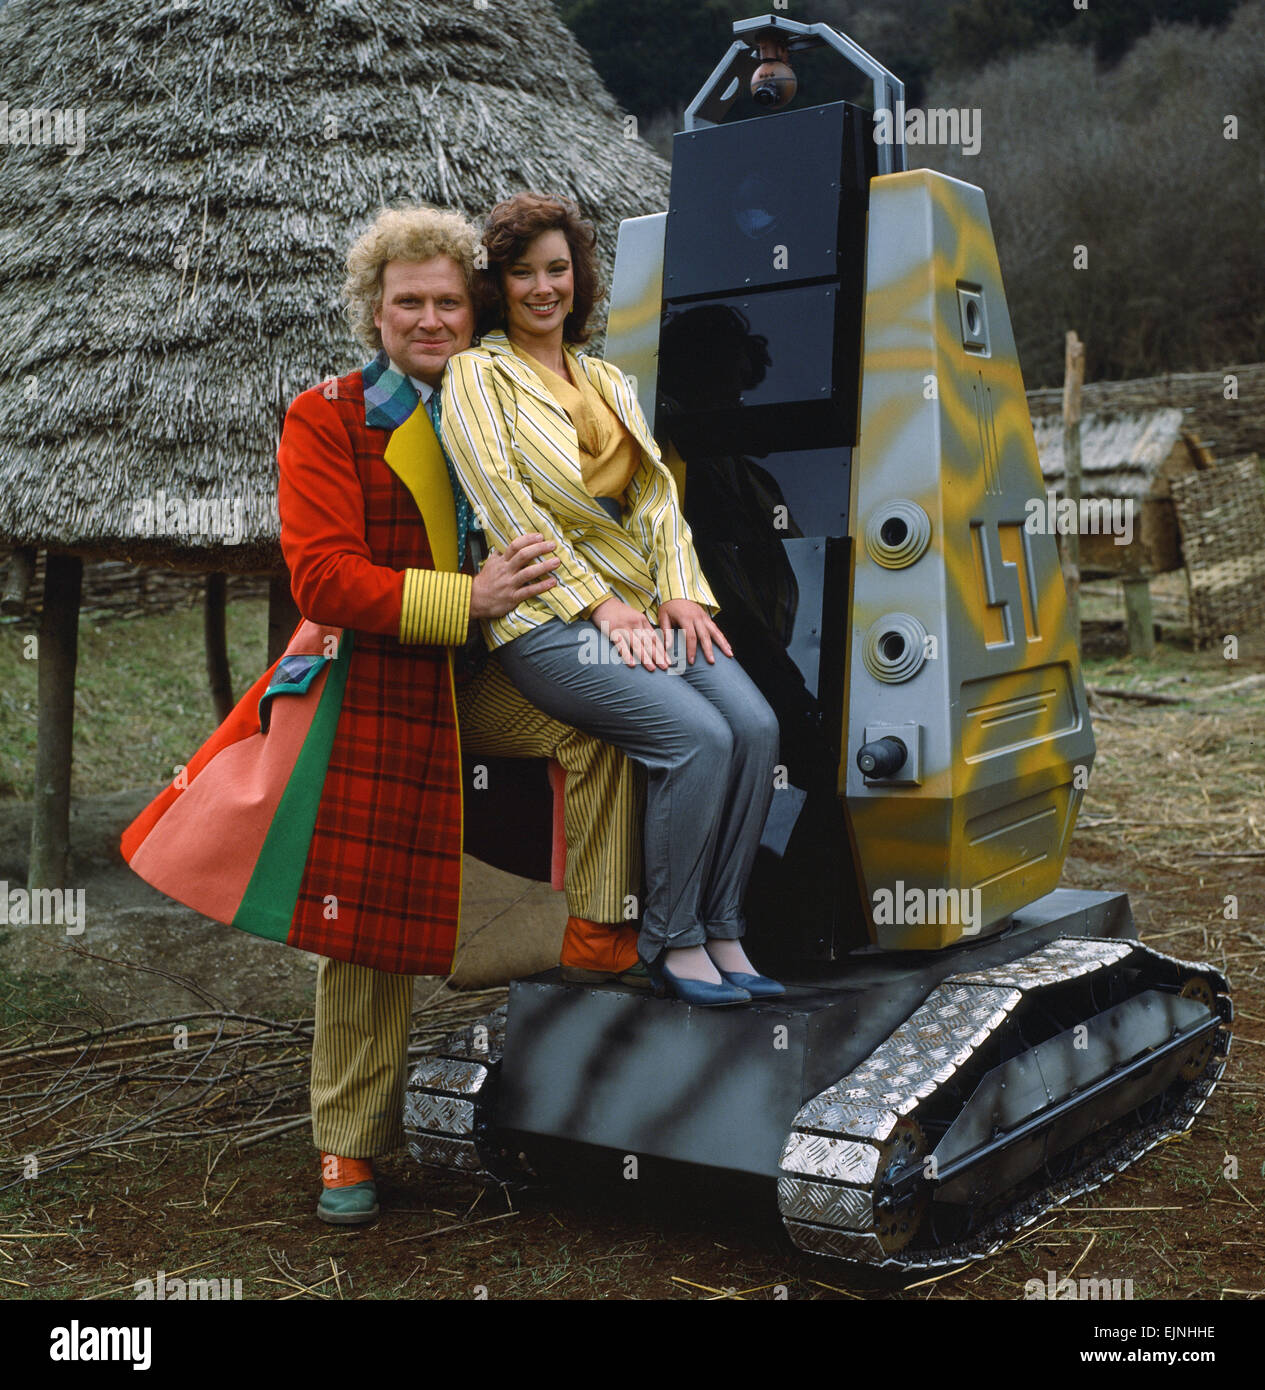 Actor Colin Baker, who plays Doctor Who in the BBC science fiction programme, photographed with his assistant Nicola Bryant who plays Perpugilliam 'Peri' Brown during filming at Butser Ancient Farm Project, Butser Hill, Hampshire for the story The Mysterious Planet, part of the larger Trial of A Time Lord narrative. 10th April 1986. Stock Photo